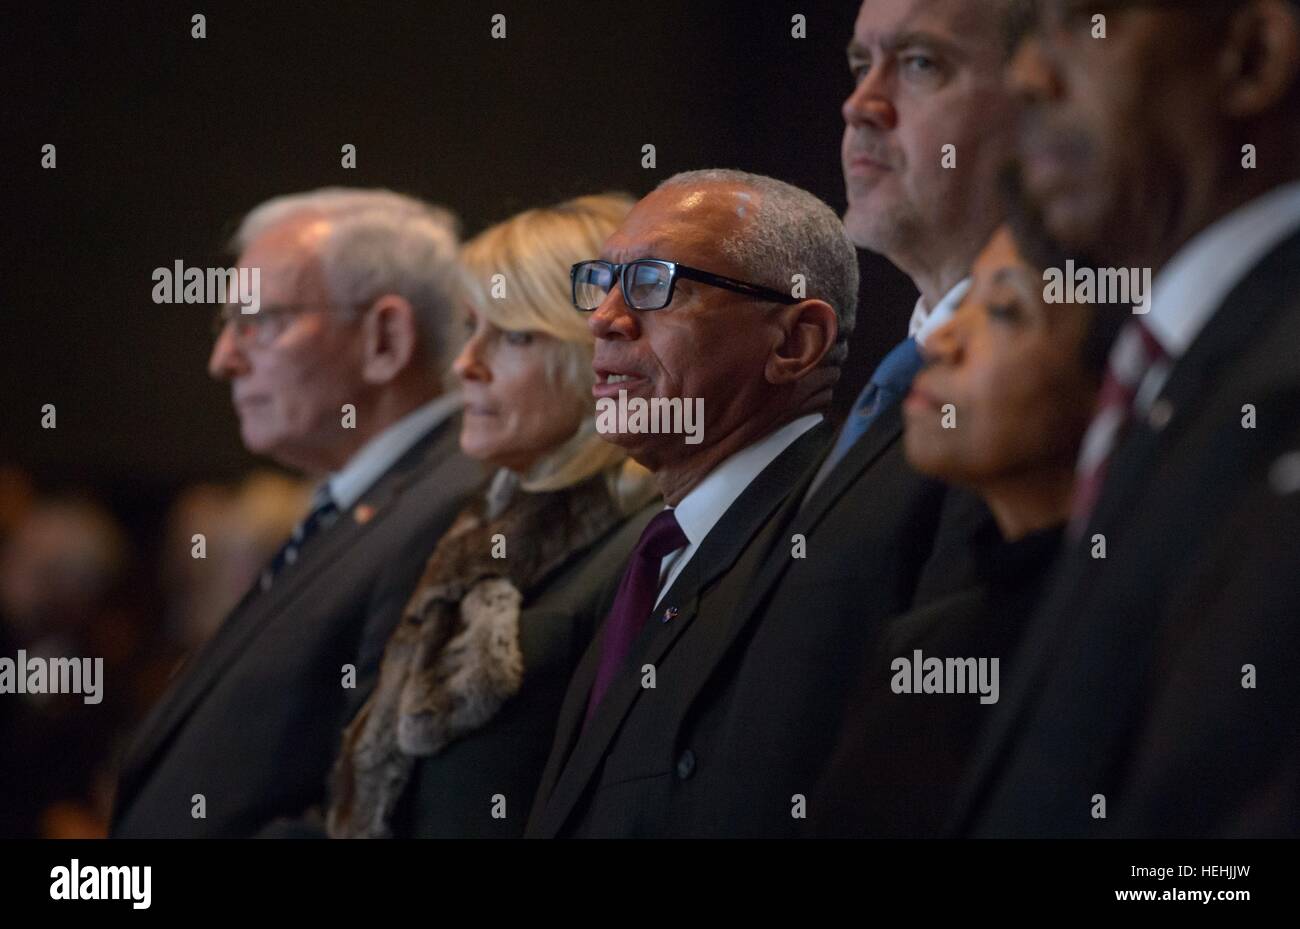 Smithsonian National Air and Space Museum Director Jack Dailey (left), Neil Armstrongs widow Carol Armstrong (middle), and NASA Administrator Charles Bolden sing along with the choir during the memorial service celebrating the life of former NASA astronaut and U.S. Senator John Glenn at the Ohio State University Mershon Auditorium December 17, 2016 in Columbus, Ohio. Stock Photo